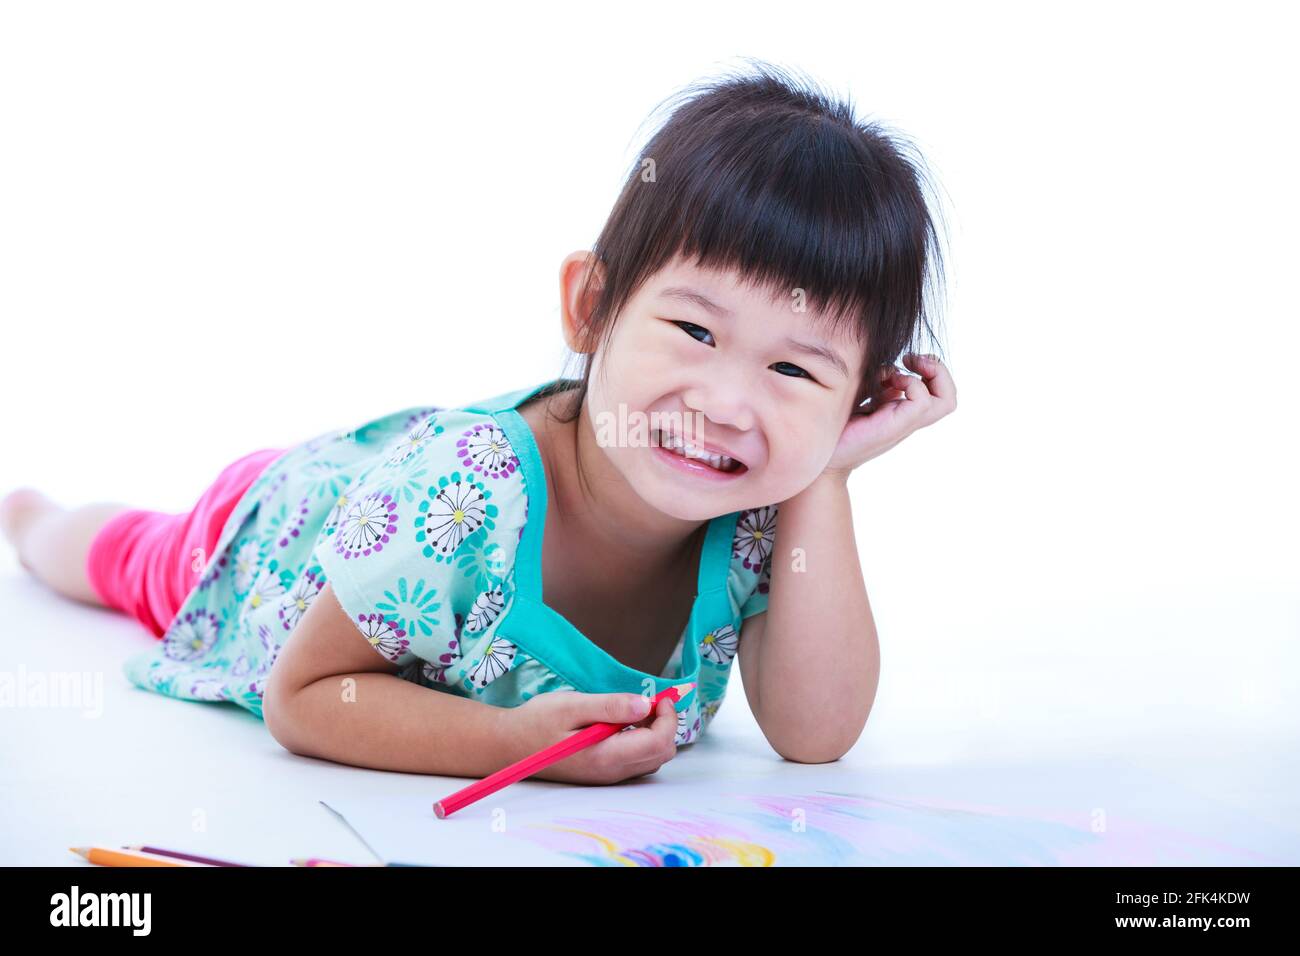 Pretty asian girl lie on the floor looking at camera and smiling. Concepts of creativity and education, strengthen the imagination of child. Studio sh Stock Photo